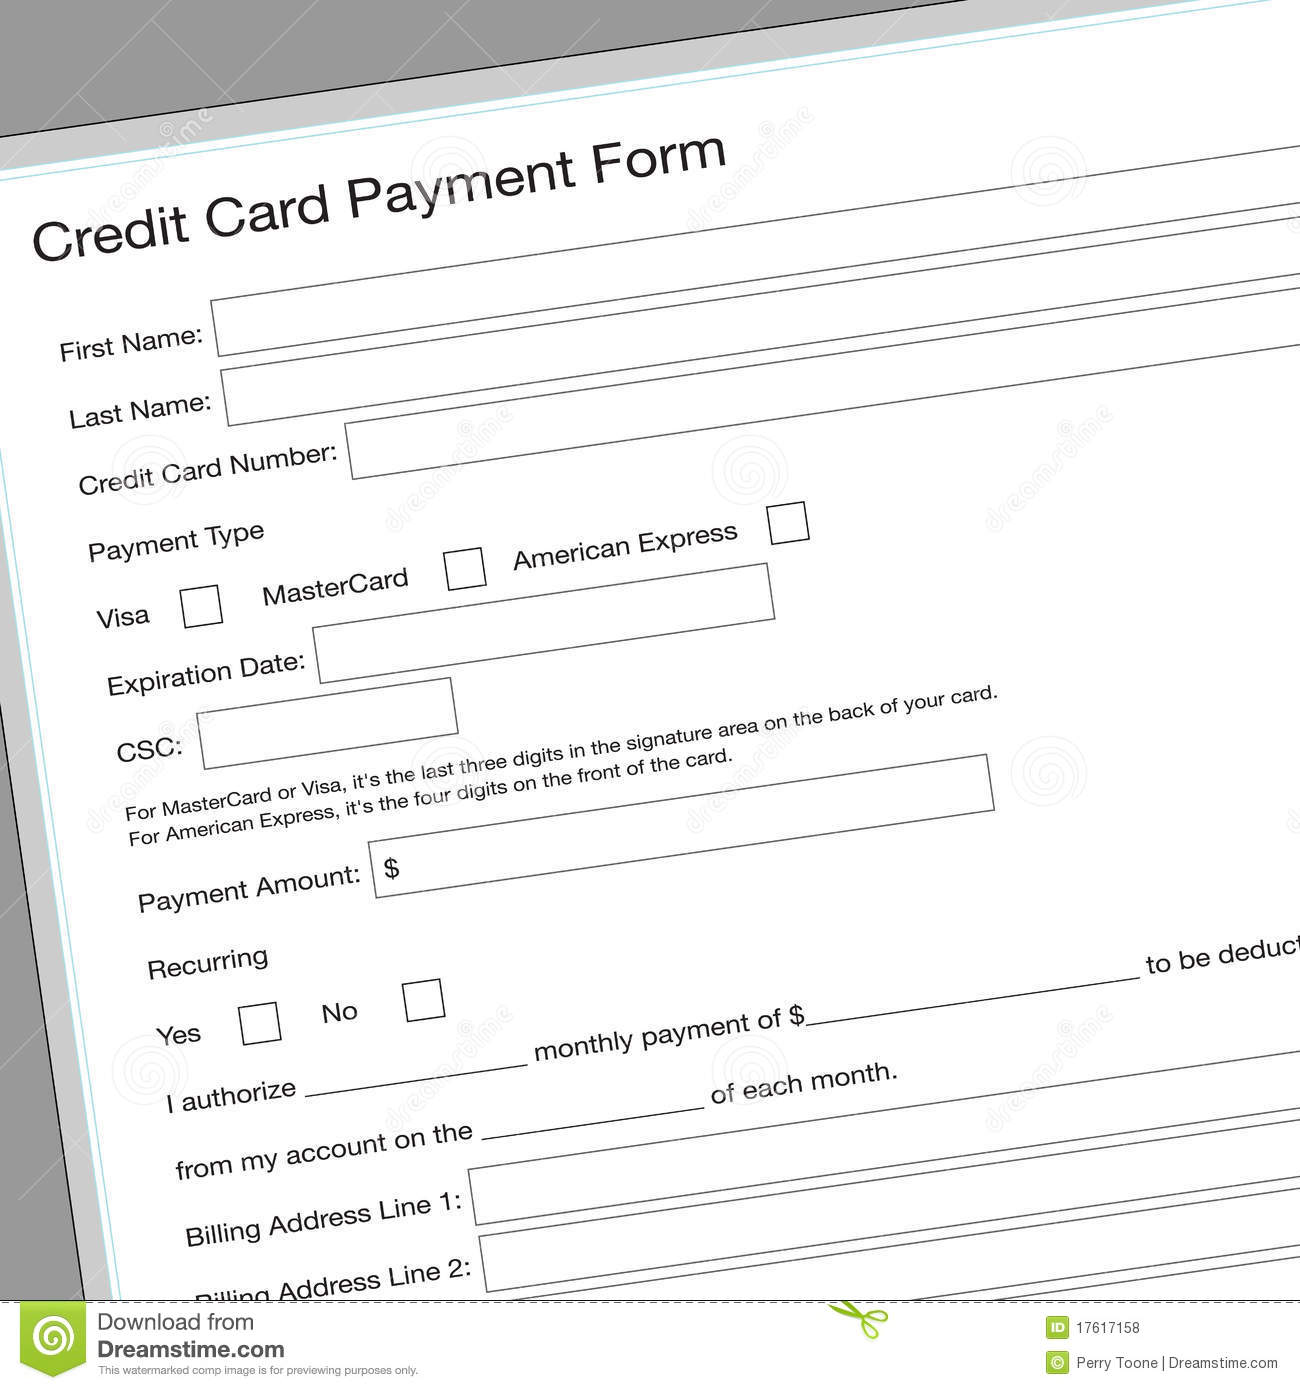 Credit Card Application Form Royalty Free Stock Photos   Image    